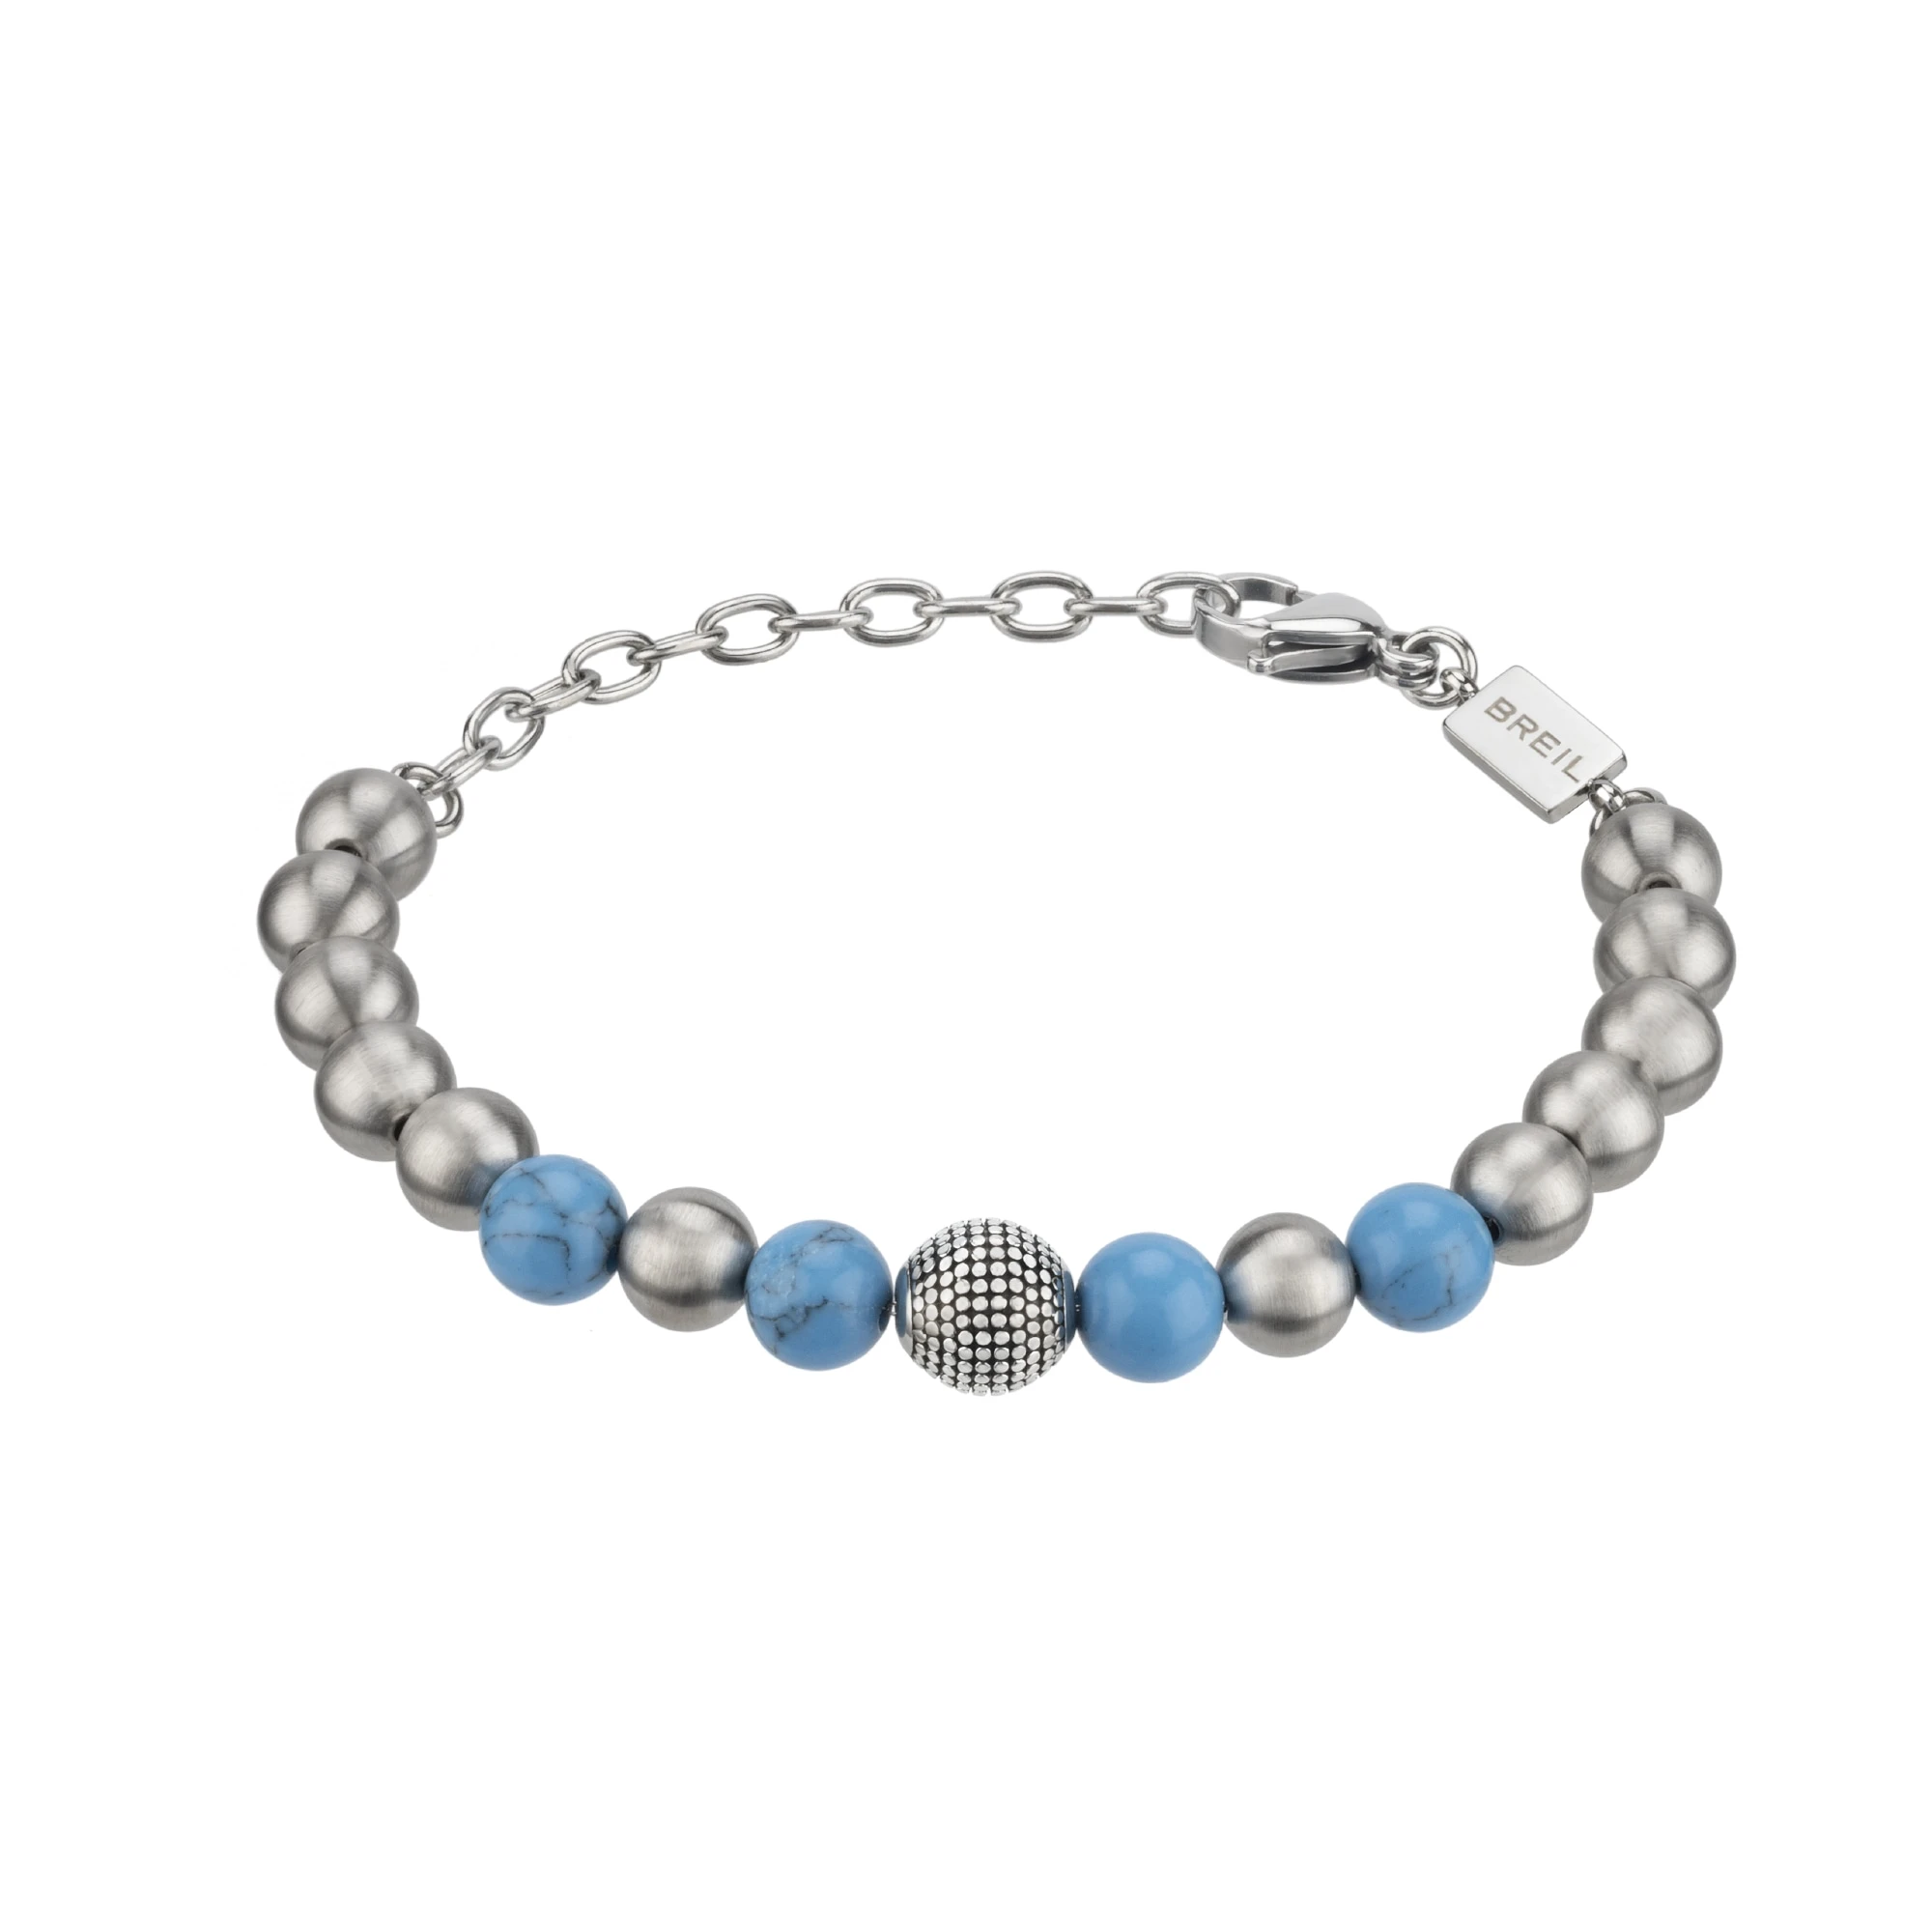 B FENCE - STAINLESS STEEL BRACELET WITH TURQUOISE STONE - 1 - TJ3142 | Breil